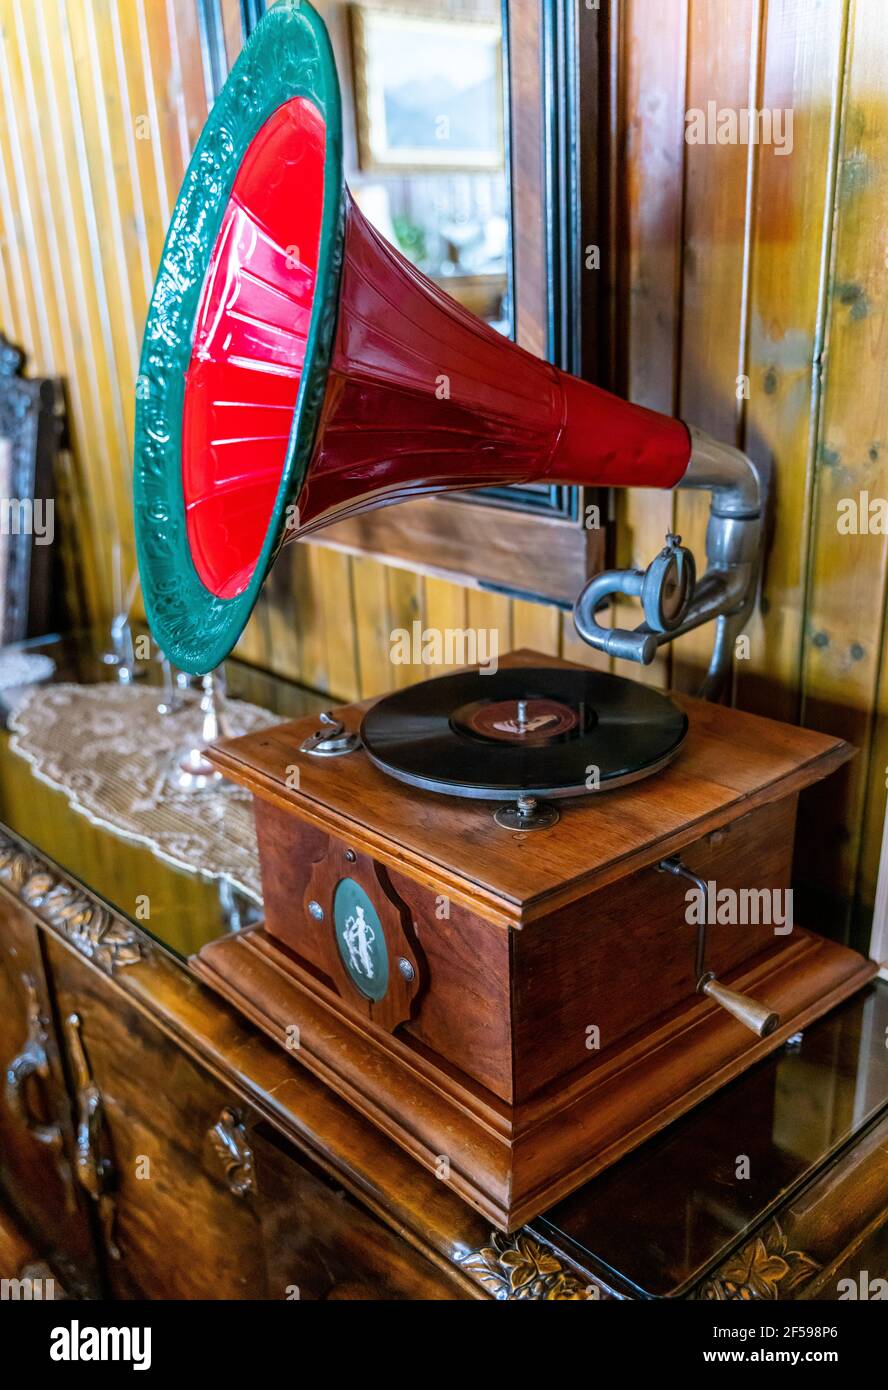 Antique gramophone vinyl record player with a large horn speaker. Stock Photo